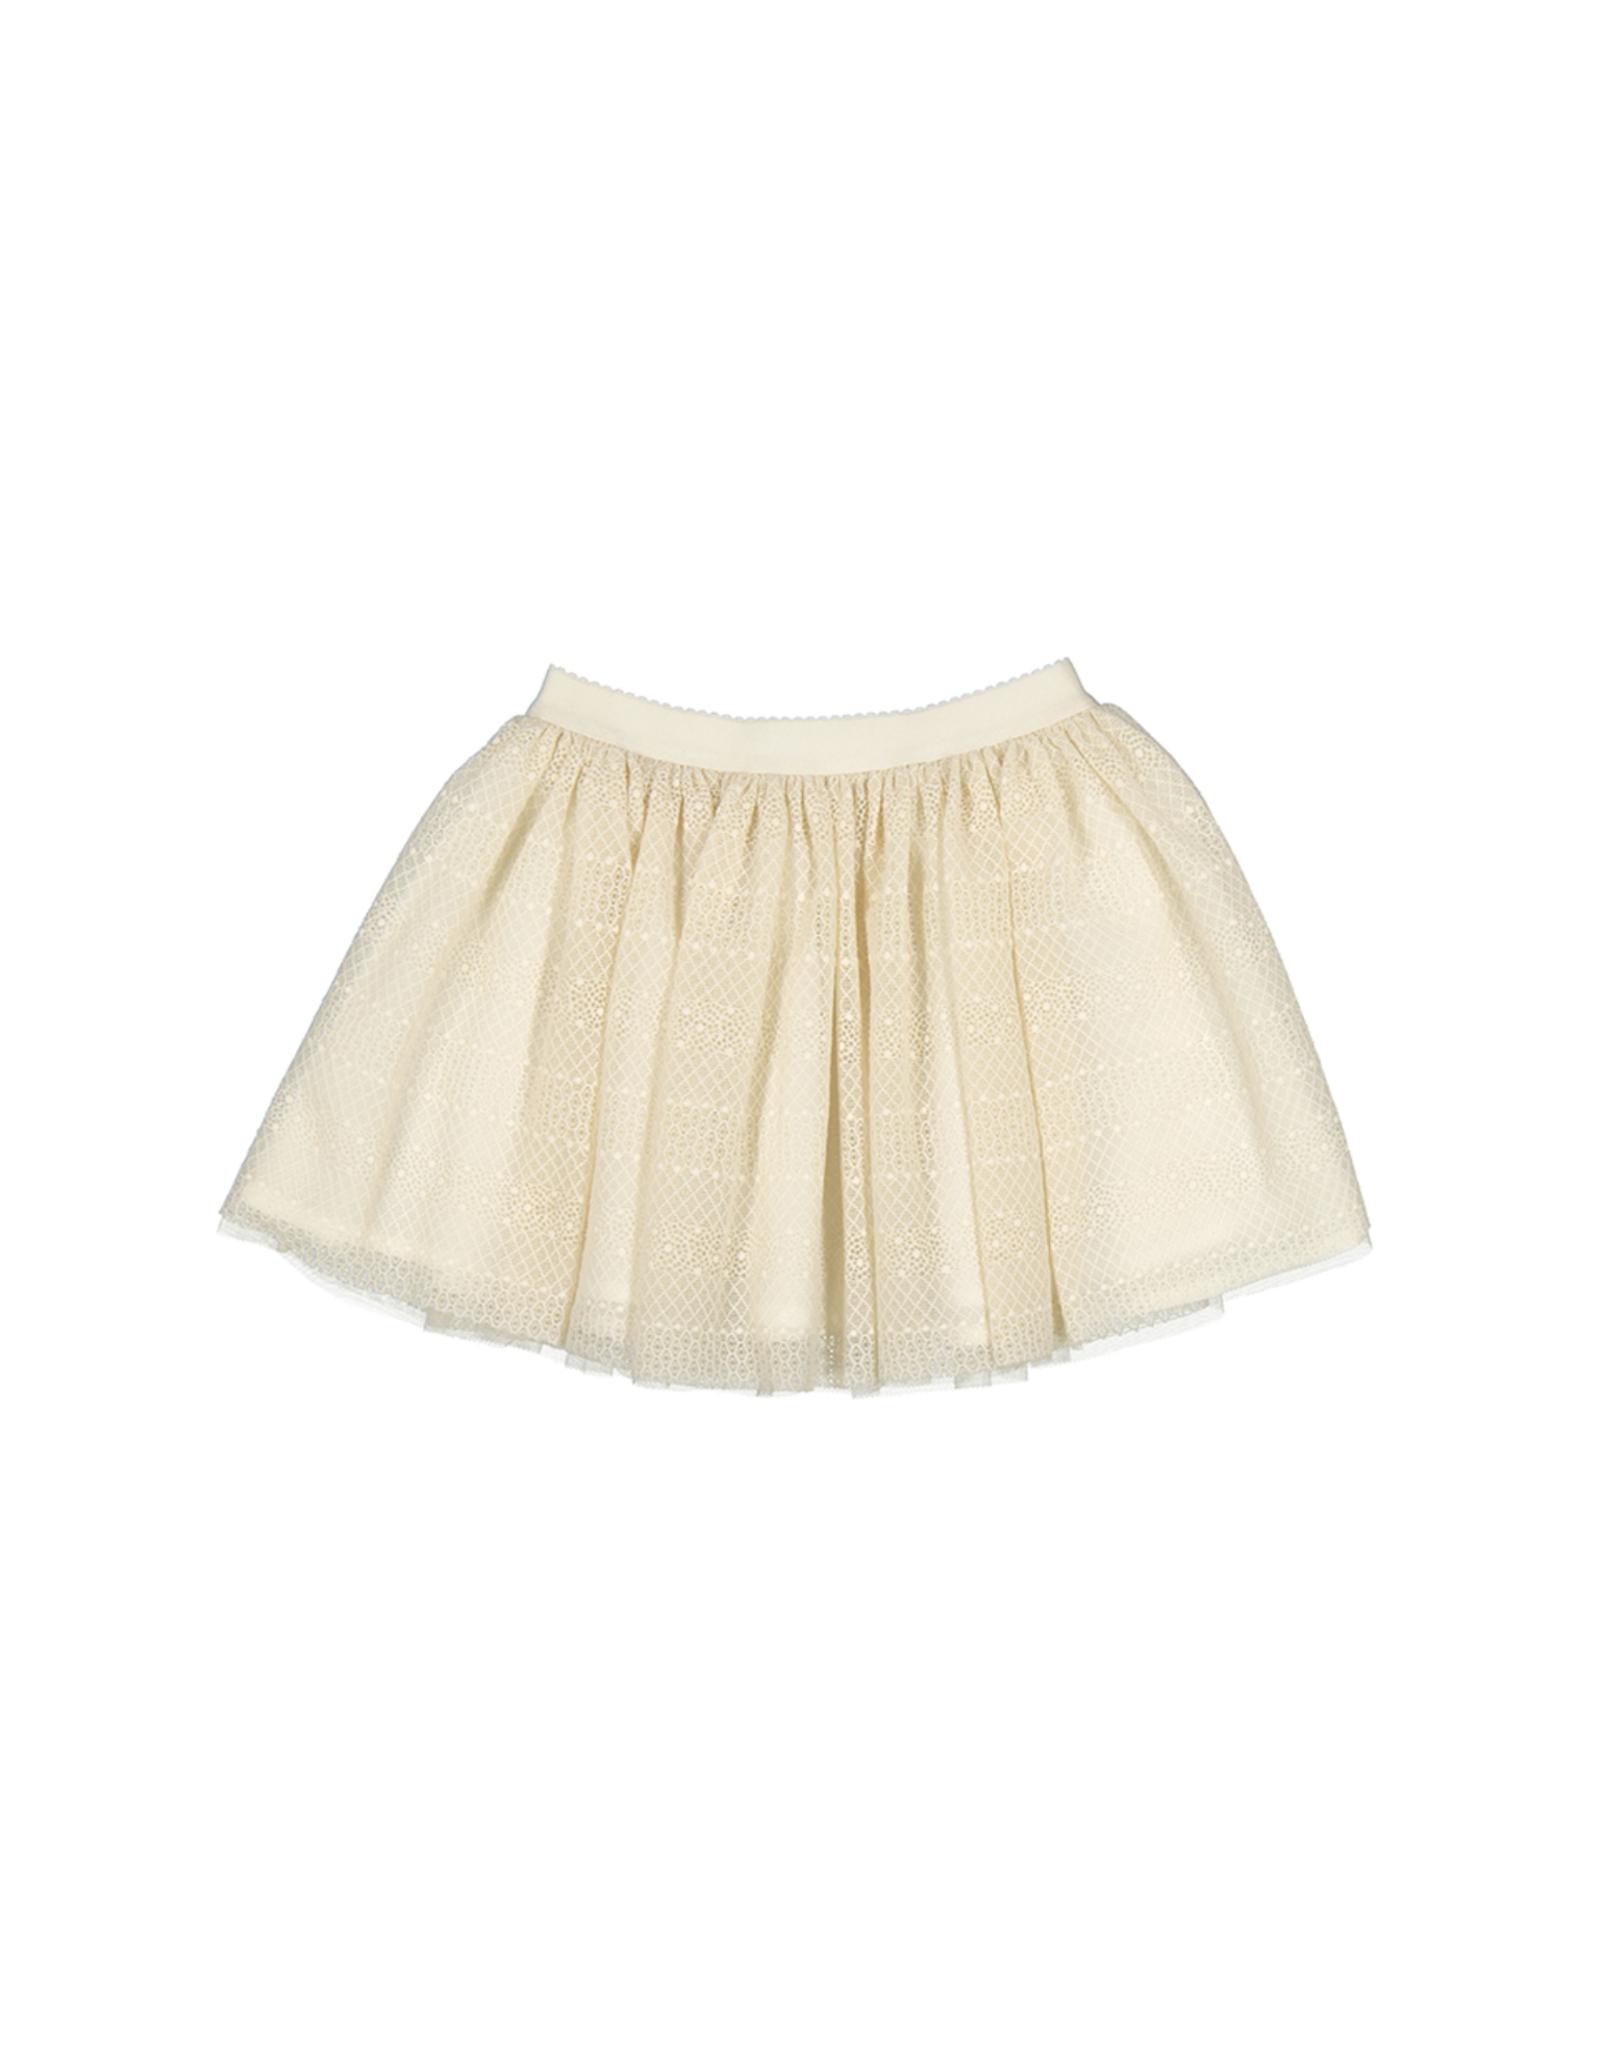 Mayoral Lace Skirt in Almond